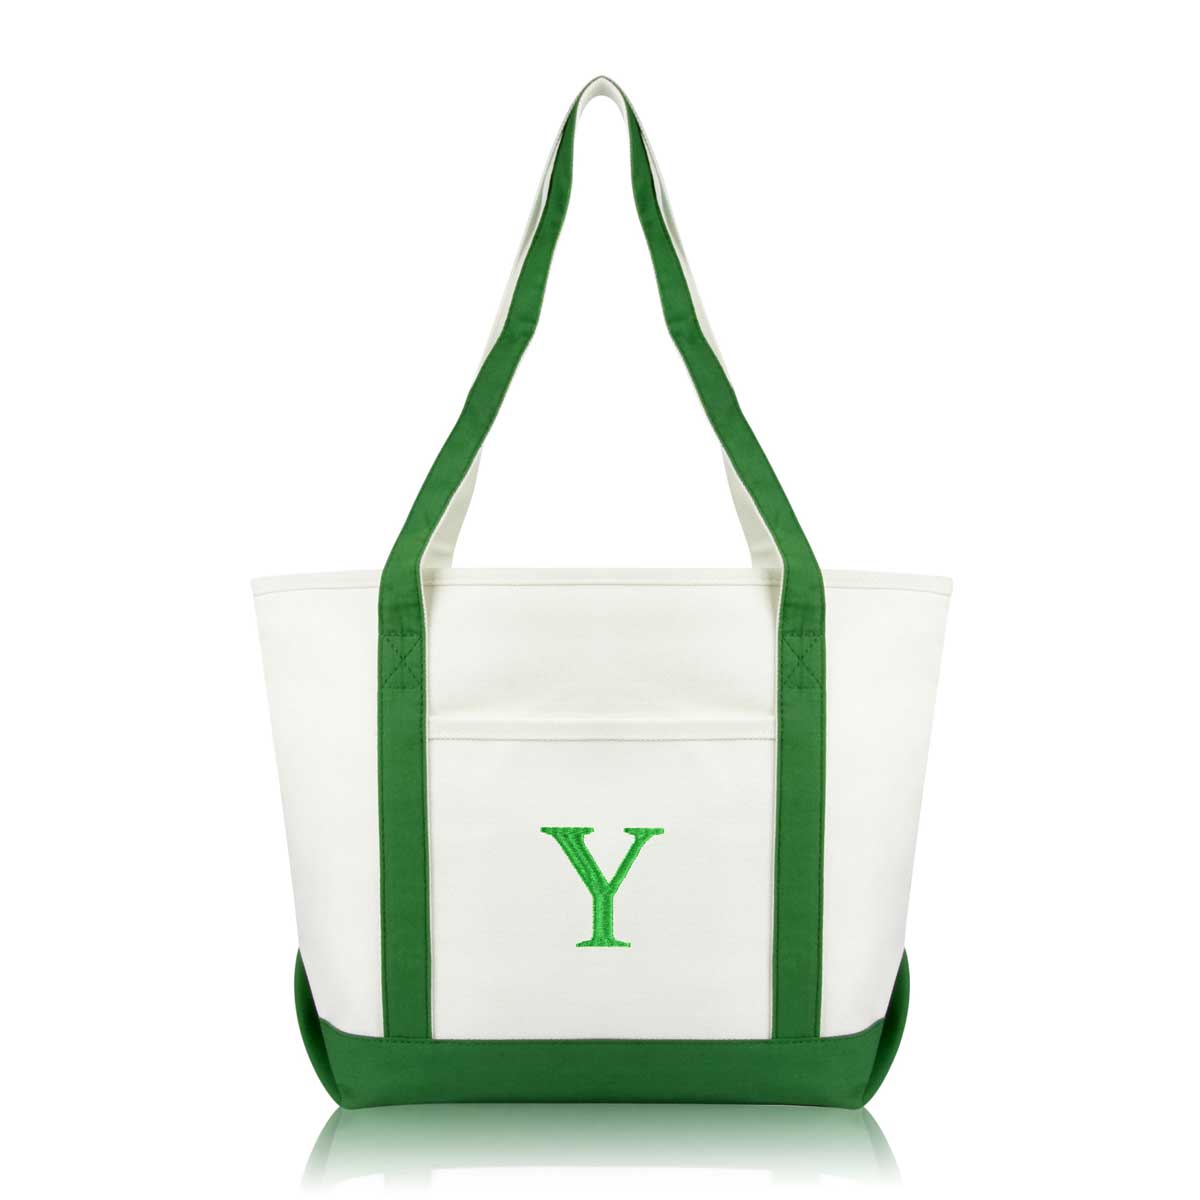 Dalix Medium Personalized Tote Bag Monogrammed Initial Letter - Y